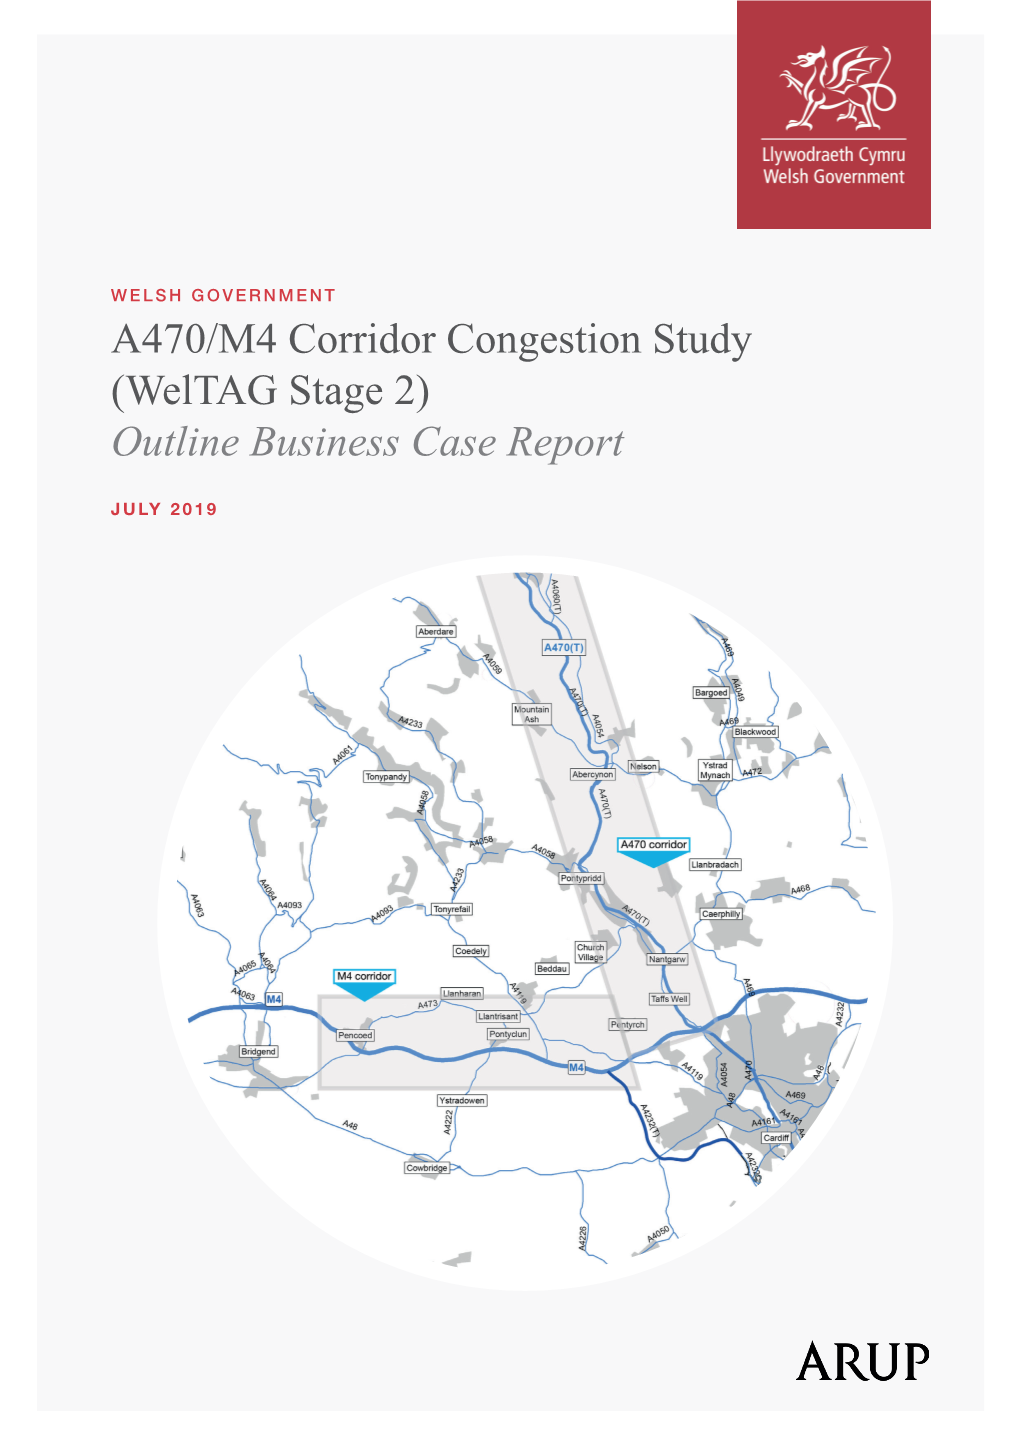 A470/M4 Corridor Congestion Study (Weltag Stage 2) Outline Business Case Report